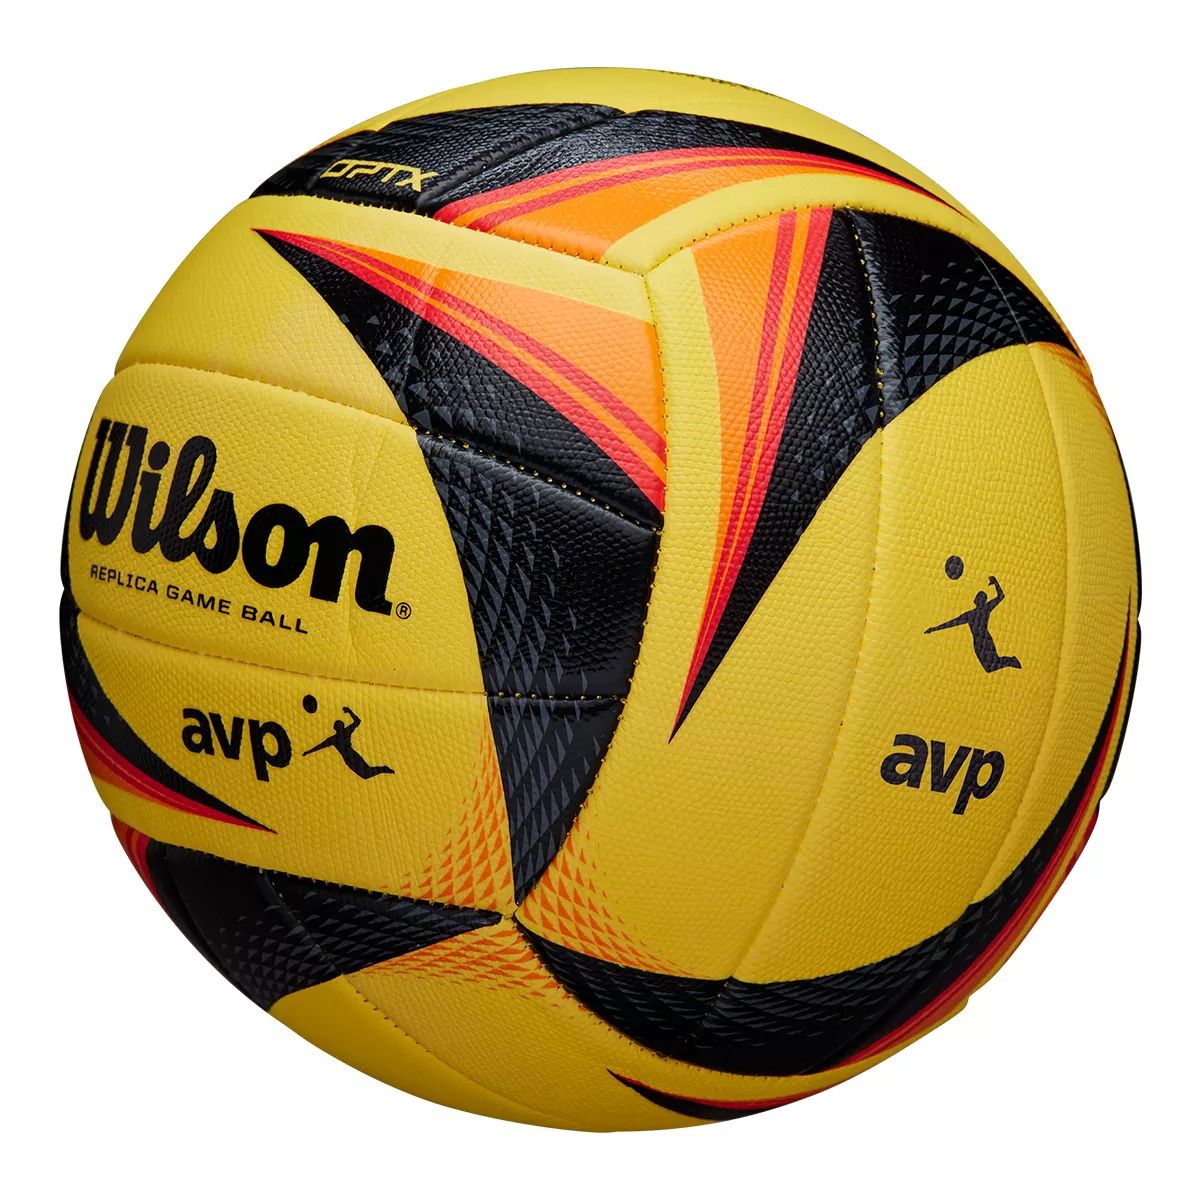 GENOUILLÈRES WILSON SRB II VOLLEYBALL - Sports Trans-Action